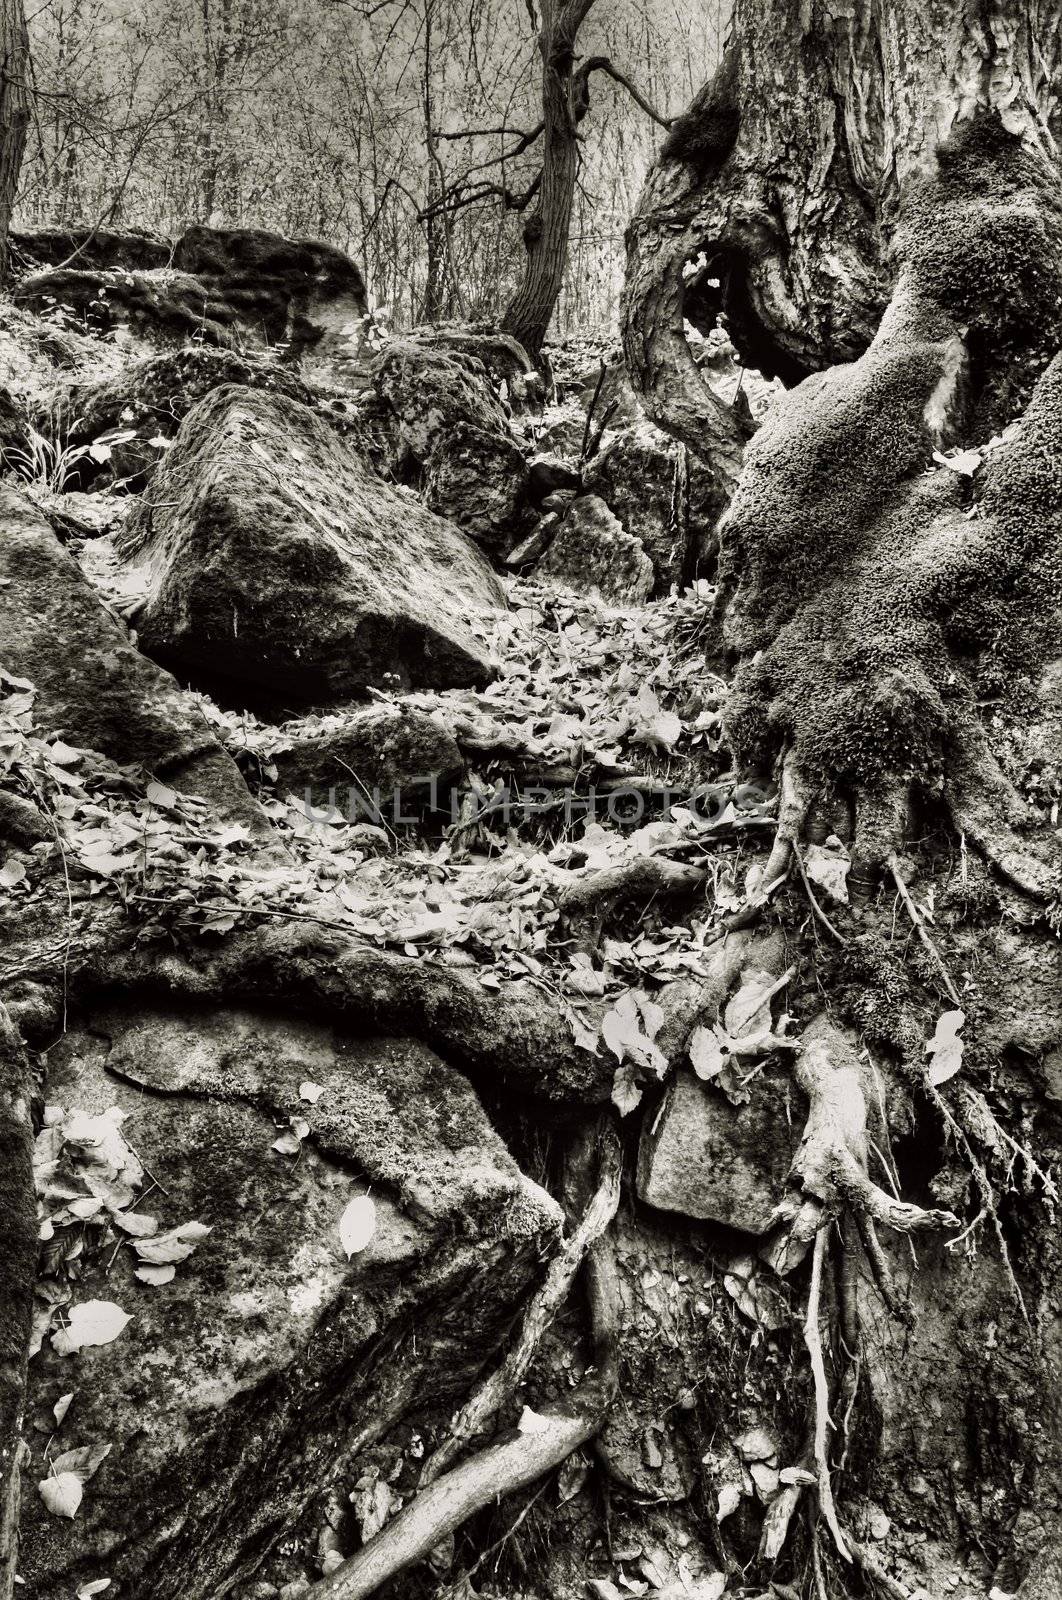 An image of moss and roots and stones